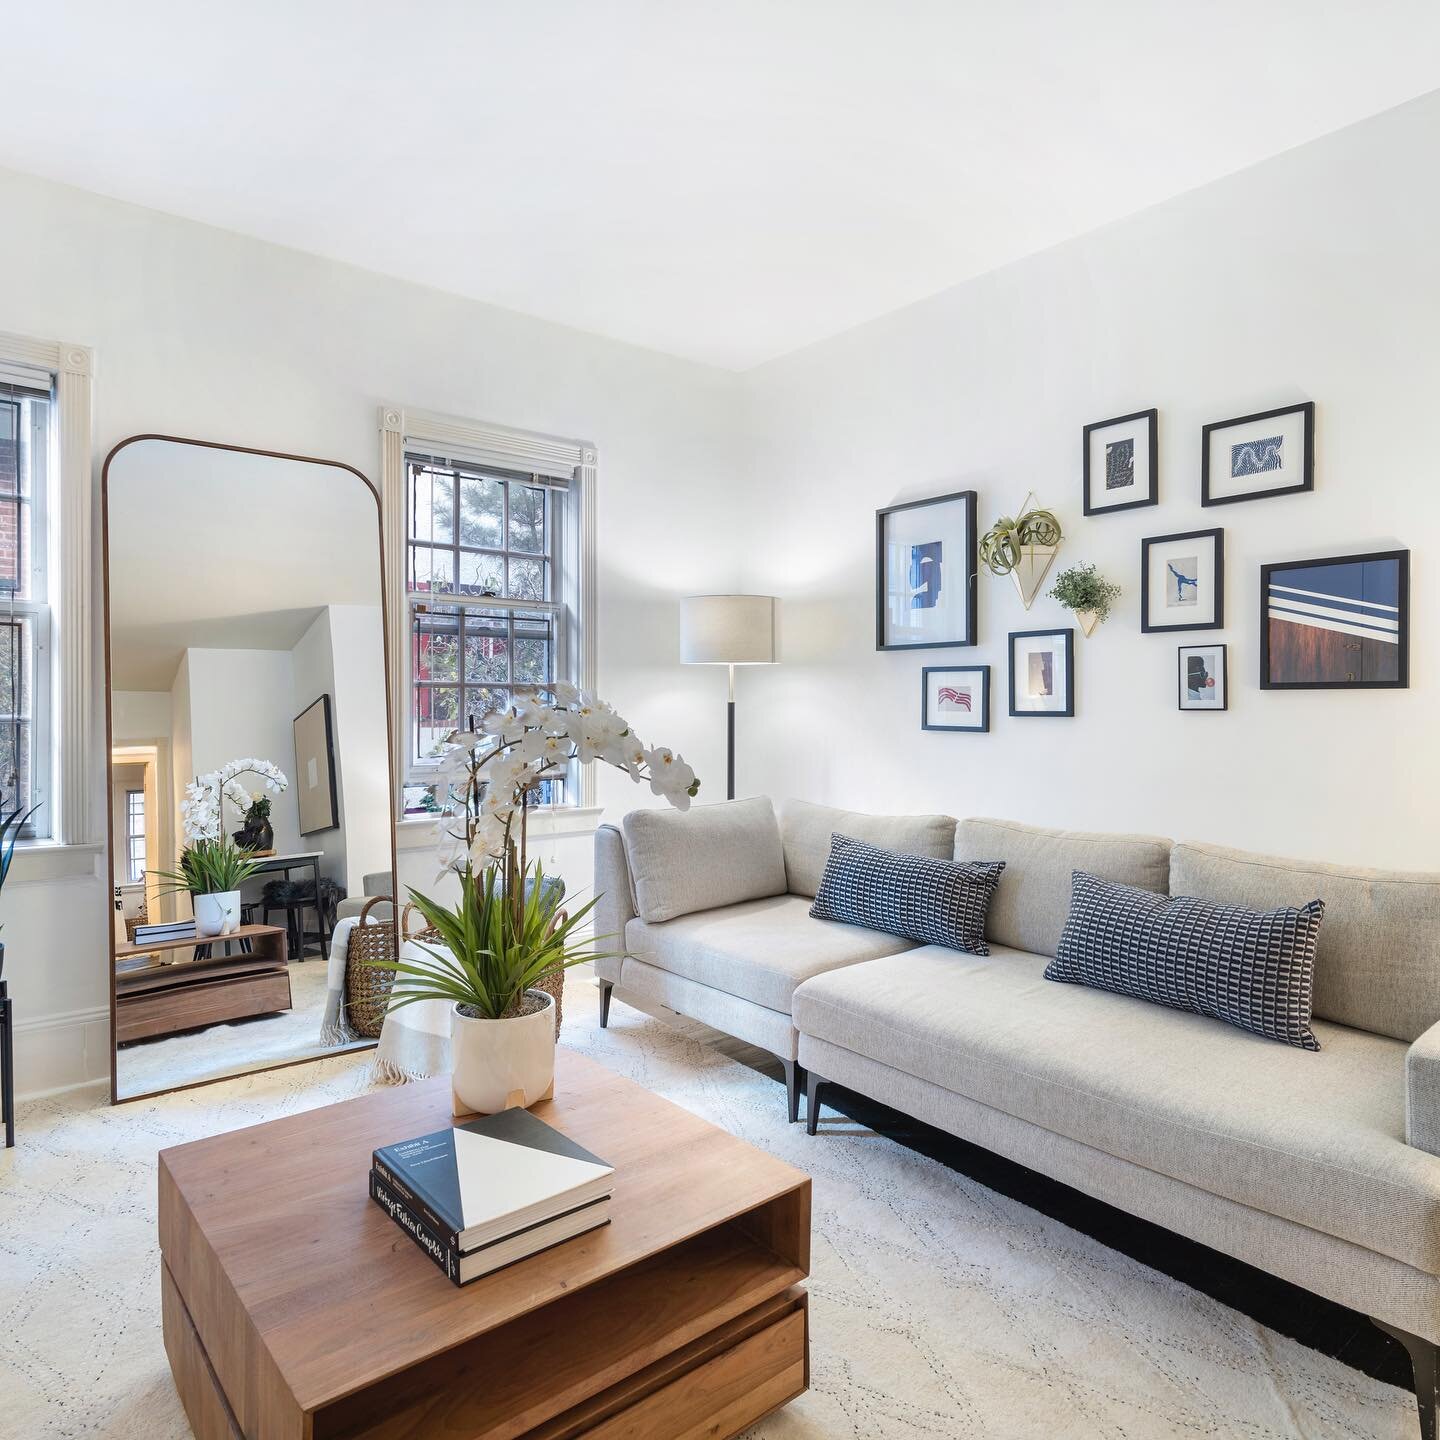 Just Sold! Our team represented the seller in the sale of this charming two bedroom in Historic Pomander Walk. After managing the cosmetic renovation and staging of the home, we sold it in just 35 days!

20 Pomander Walk, #1 
&bull; 2 Bedroom
&bull; 